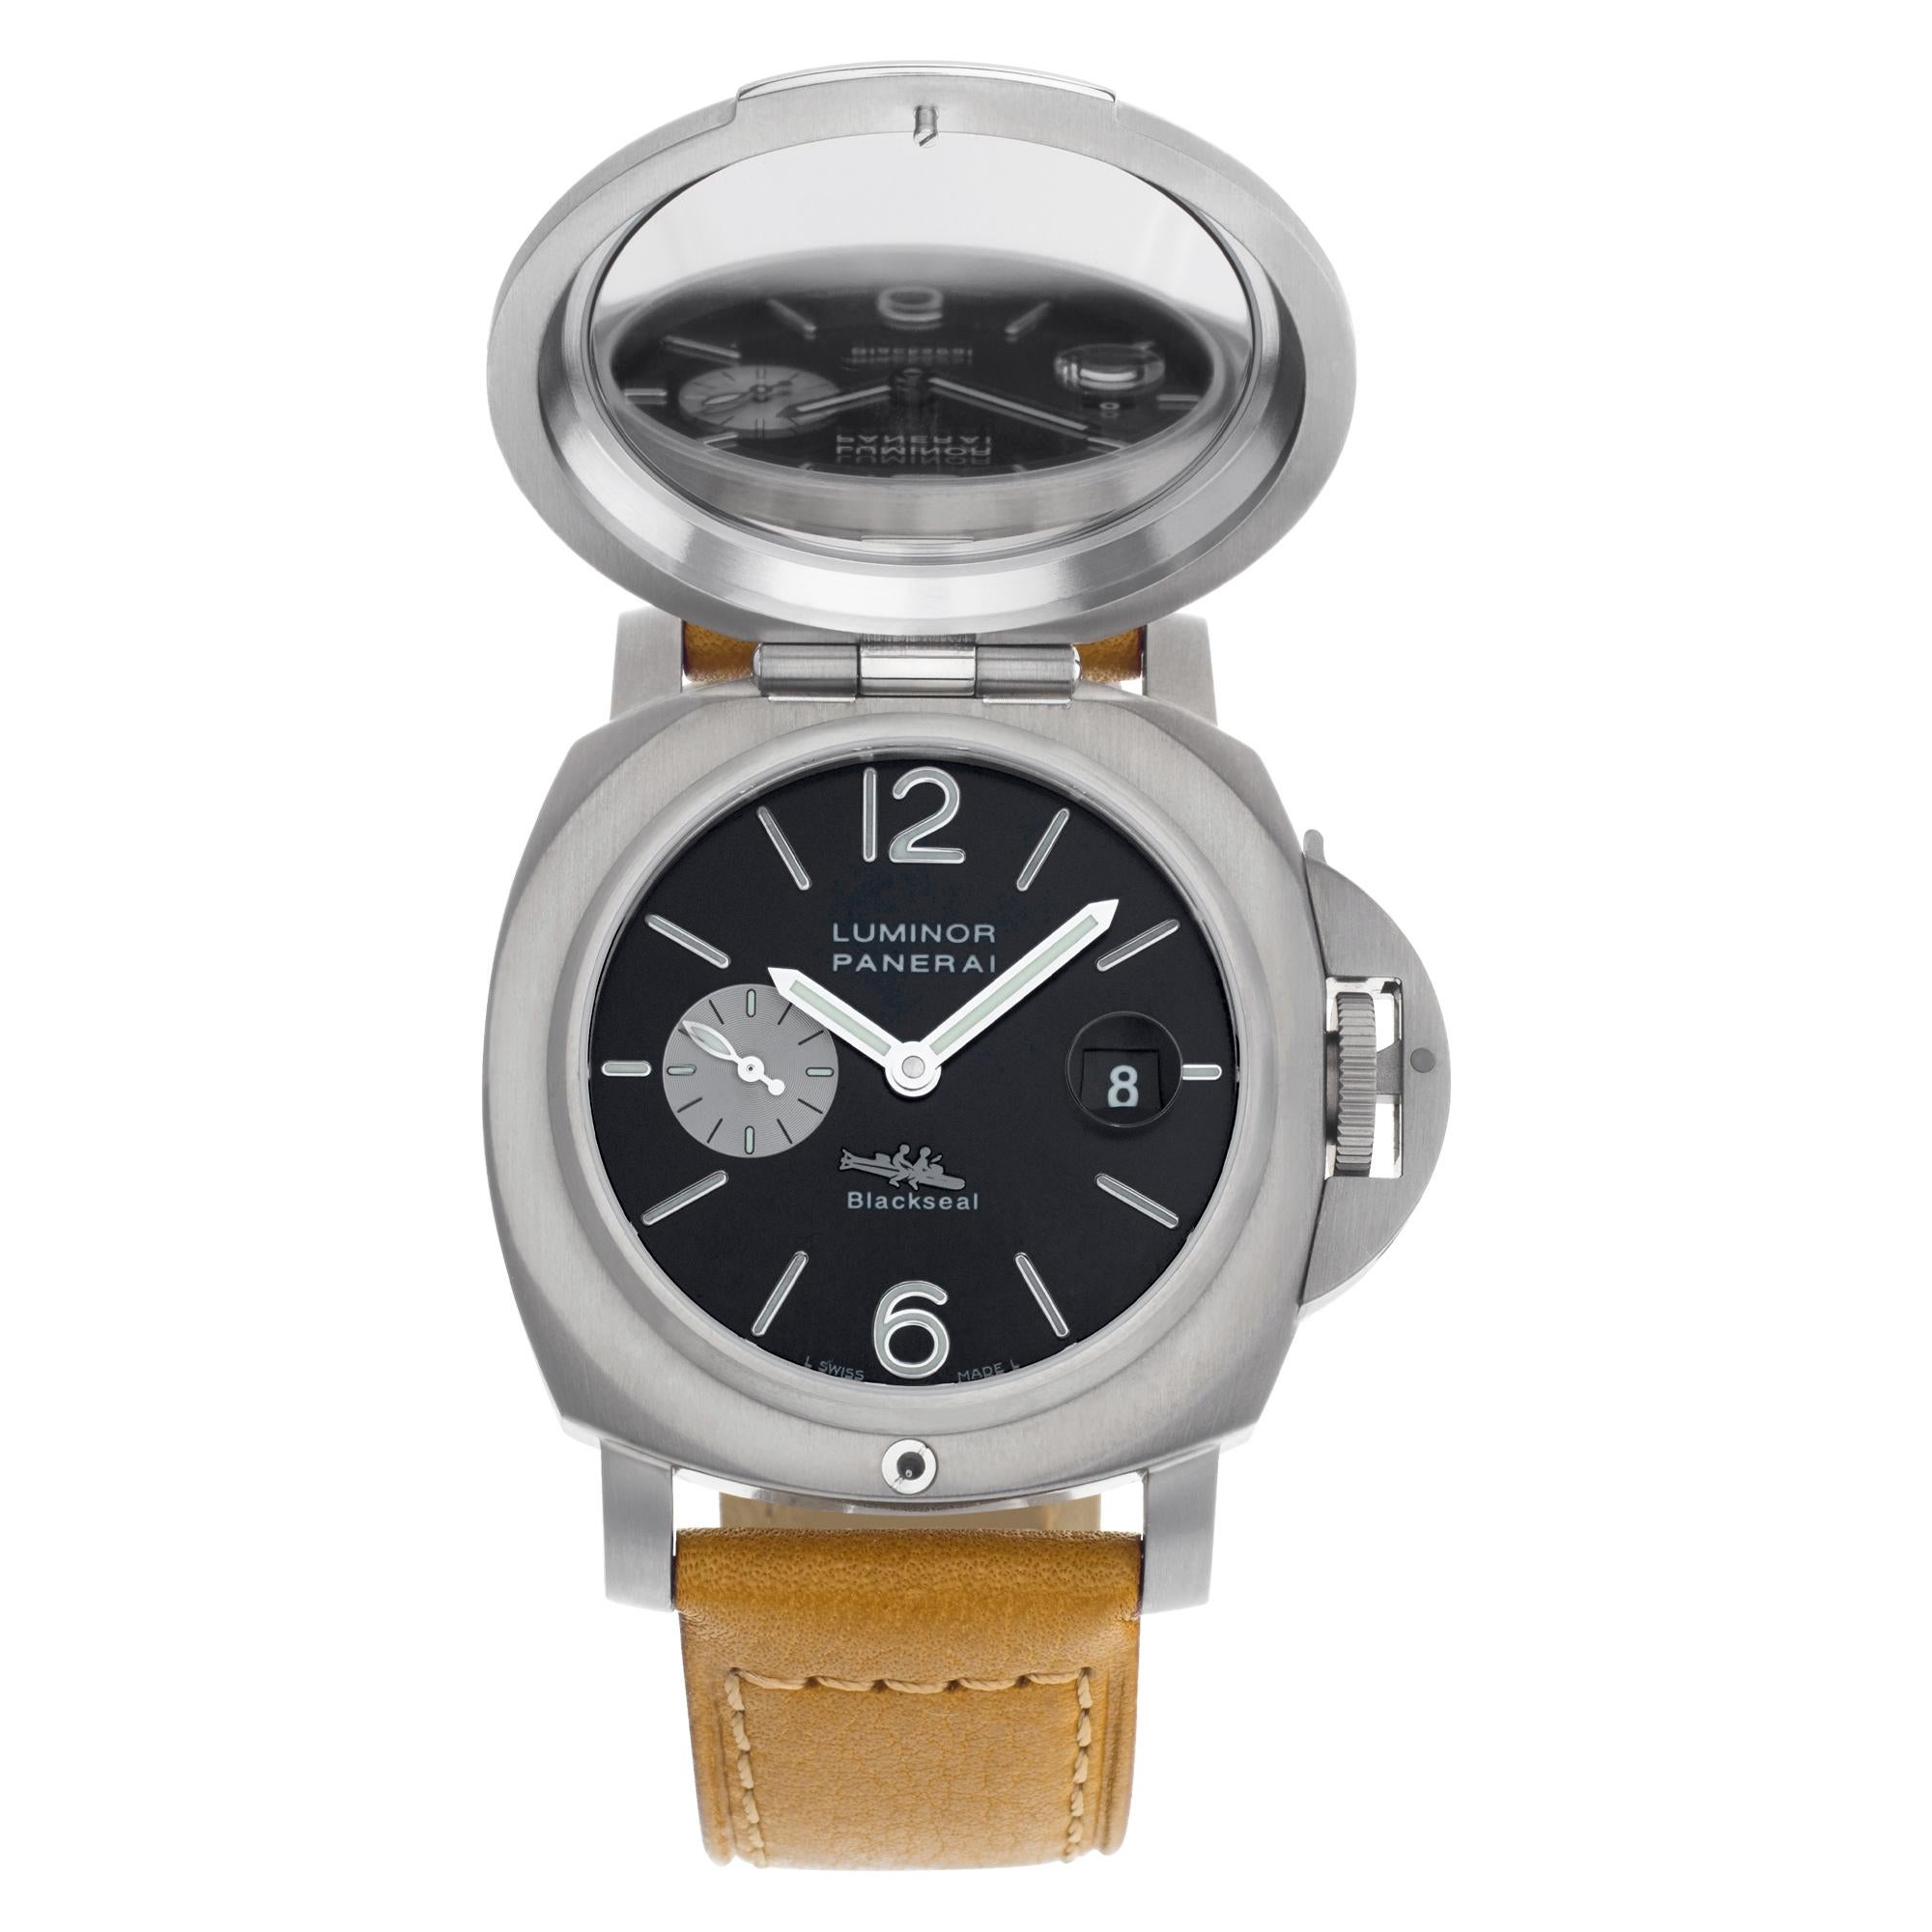 Panerai Luminor Blackseal for Purdey in titanium on leather strap. Auto w/ subseconds and date. 44 mm case size. Hinged dial cover features Italian Navy special forces on a manned torpedo. With box, certificates, booklets, guarantee card, tool,